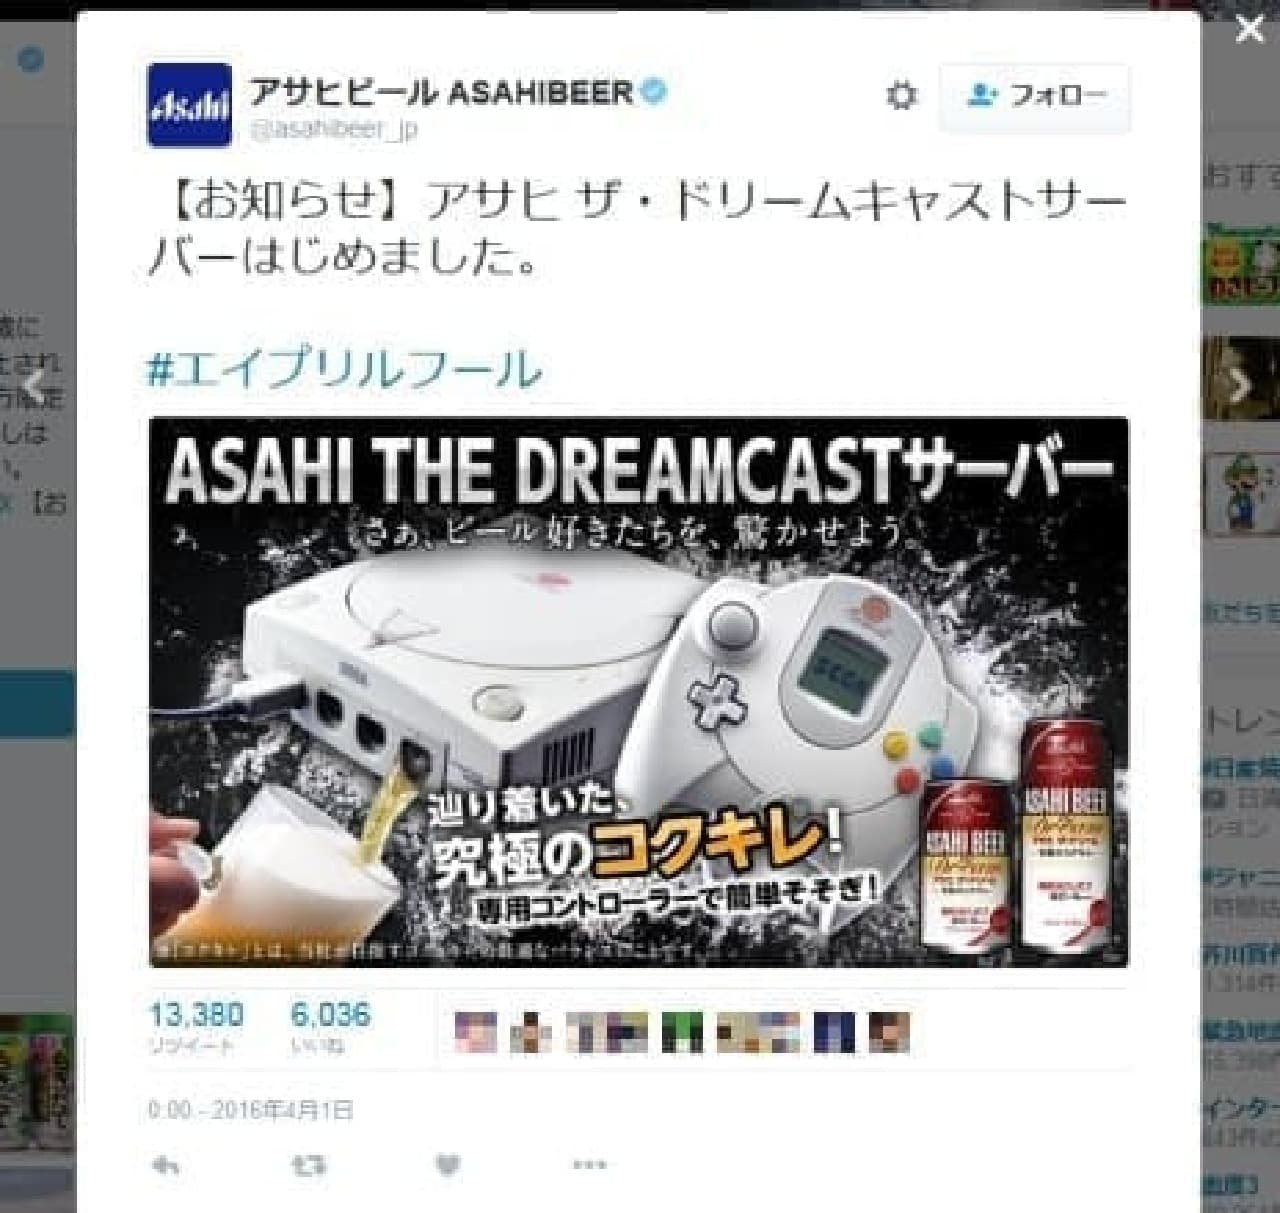 Beer from a home video game console !? (The image is a tweet from Asahi Breweries)